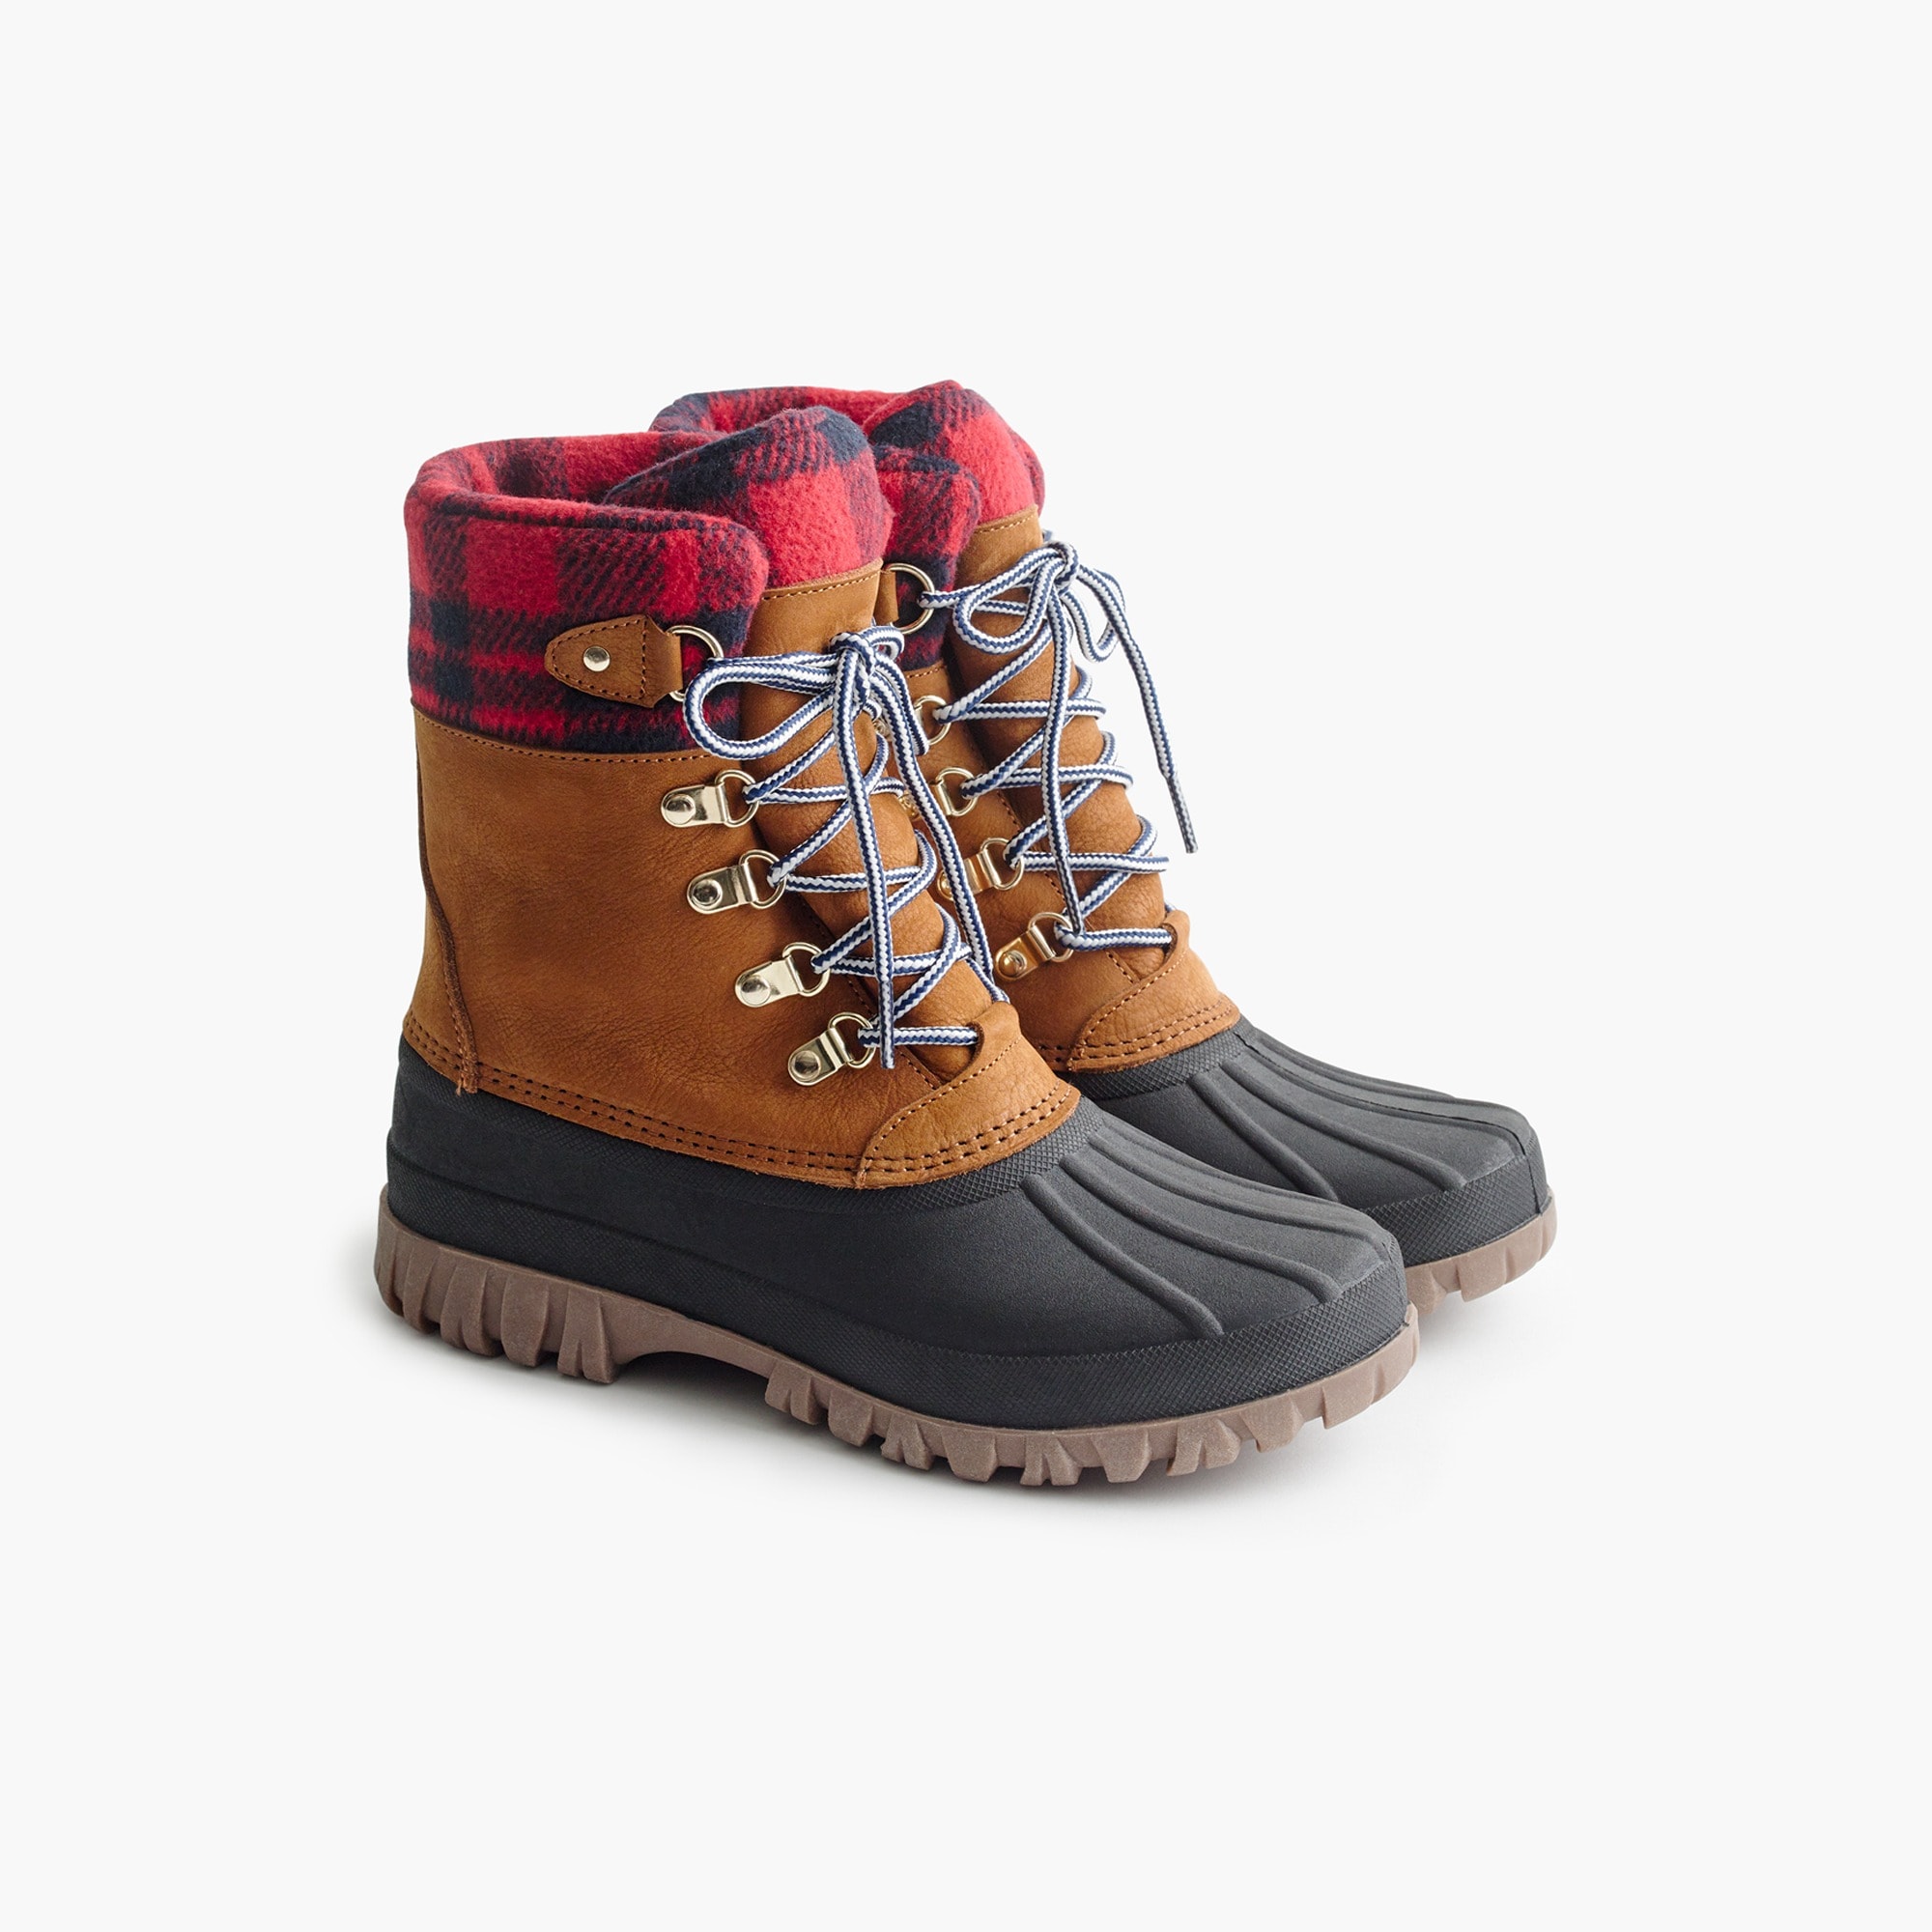 J.Crew: Perfect Winter Boots For Women